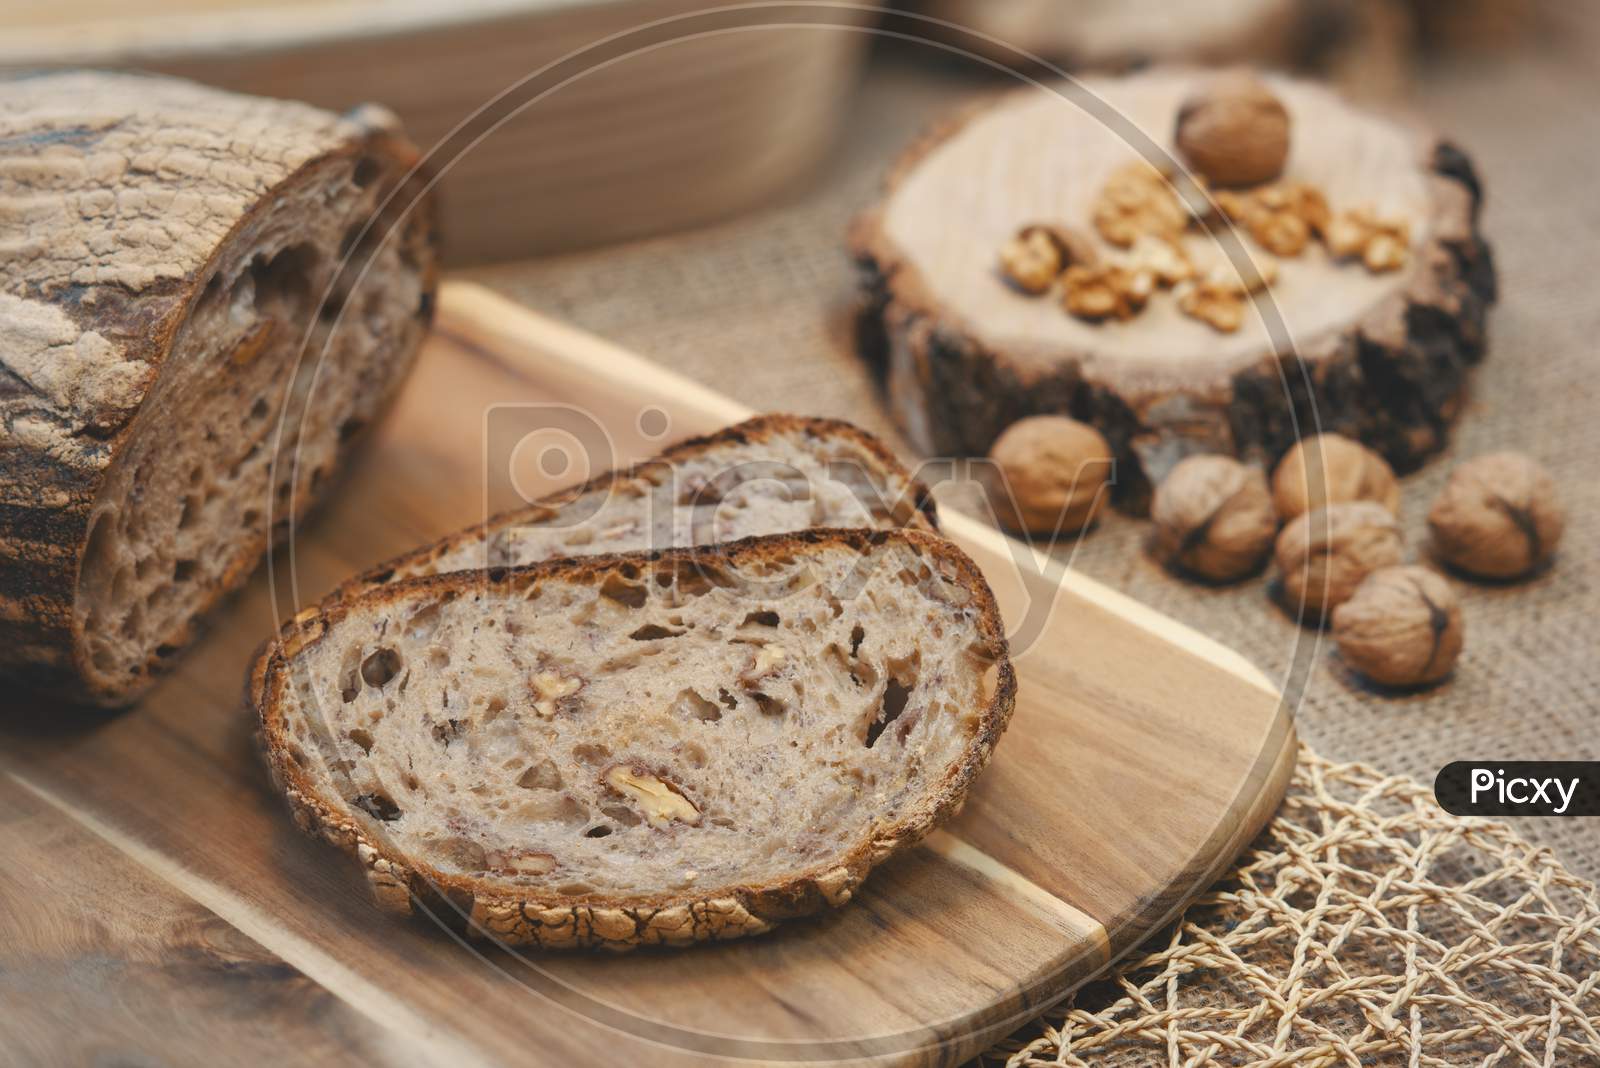 Two slices of walnut bread with other walnuts next to it.